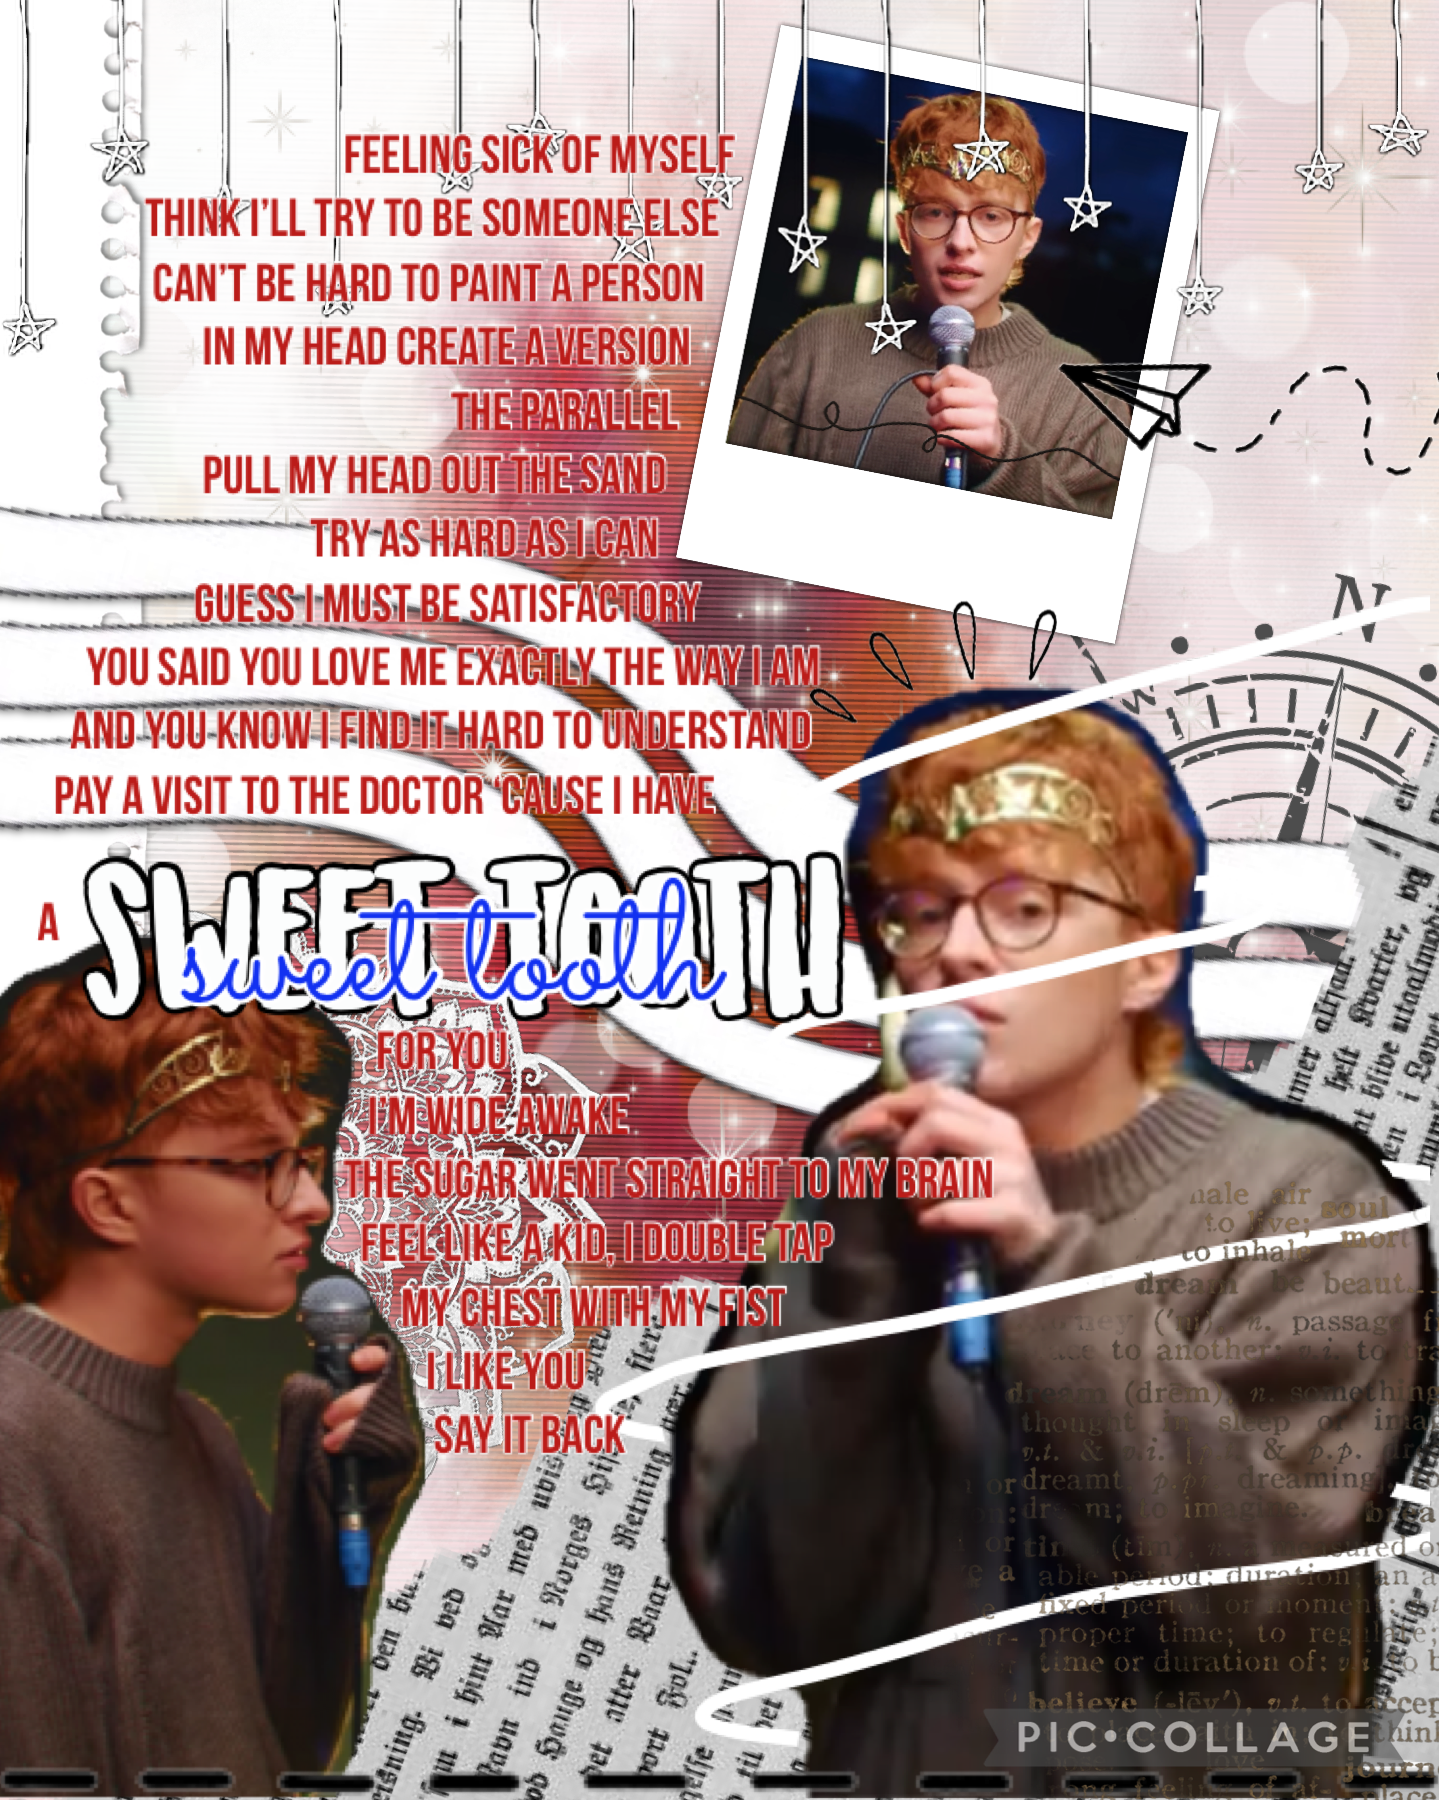 🦷 TAP 🦷
🦷 Cavetown ‘Sweet Tooth’ collage!! 🦷
🦷 sorry for not being that active on this acc, ive had zero motivation 😂 🦷
🦷 love u!! 🦷
🦷🦷